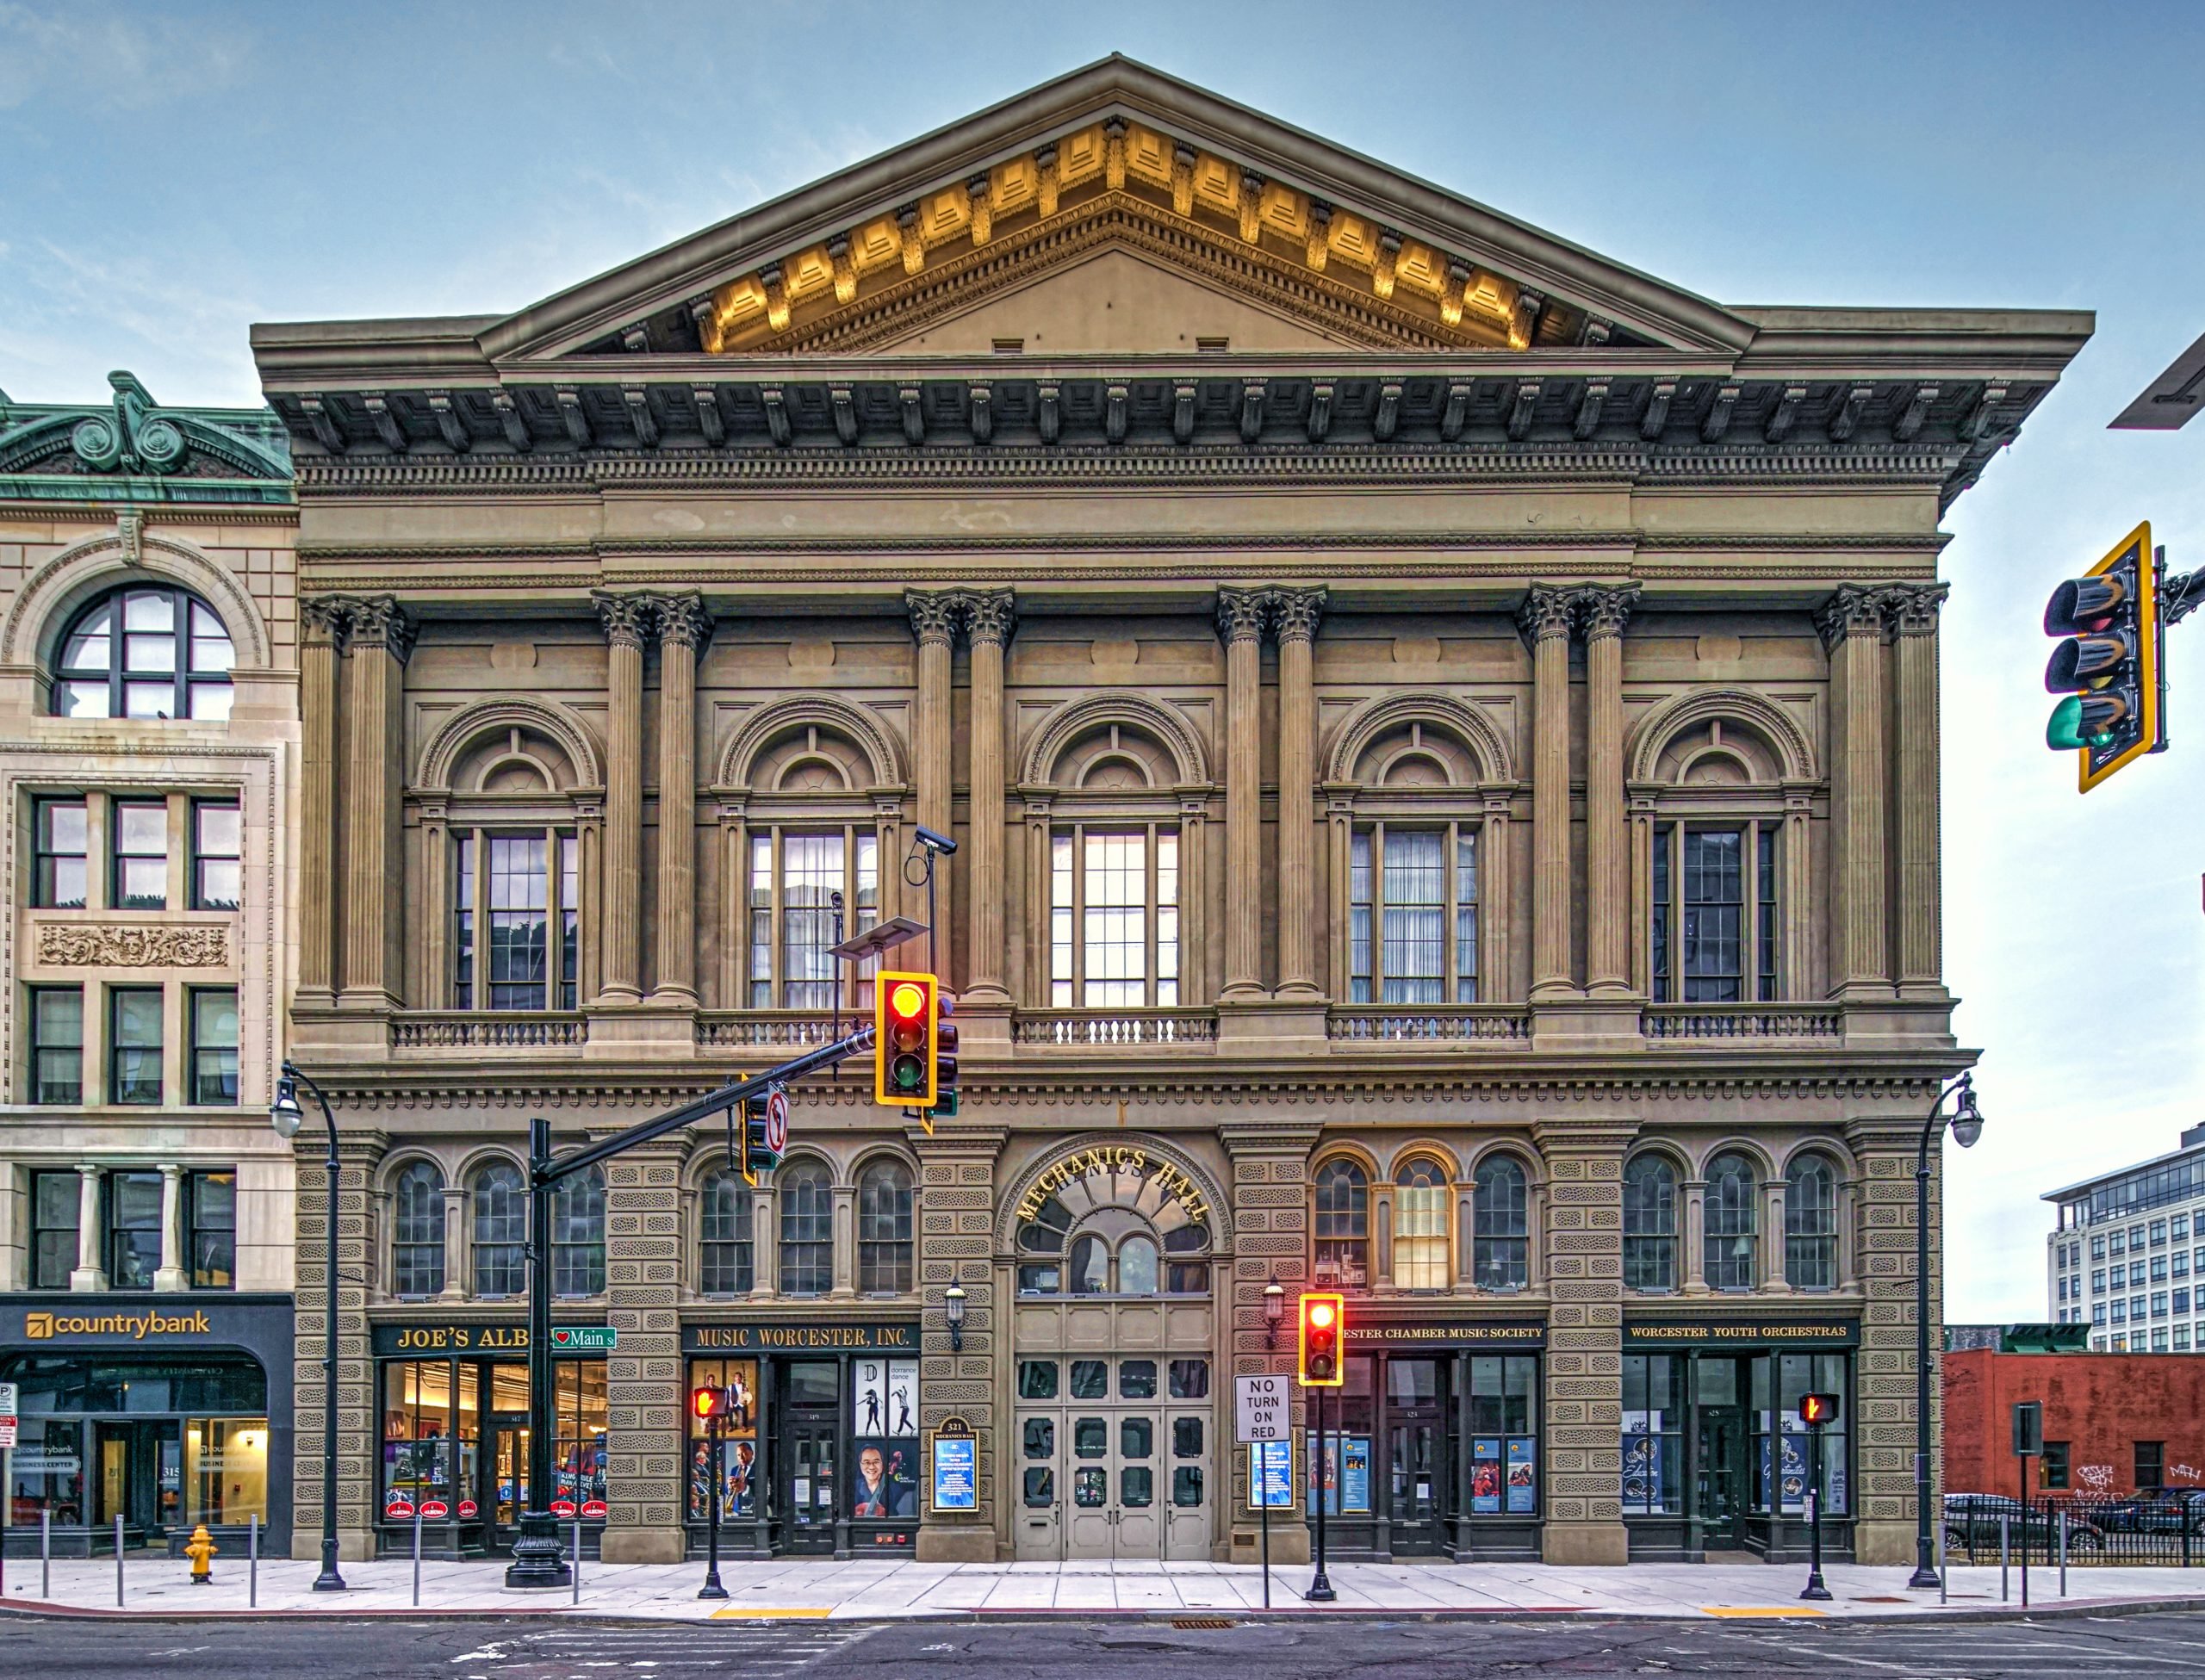 Columned facade of Mechanics Hall, Worcester with traffic lights in the foreground. Storefronts are visible at street level.